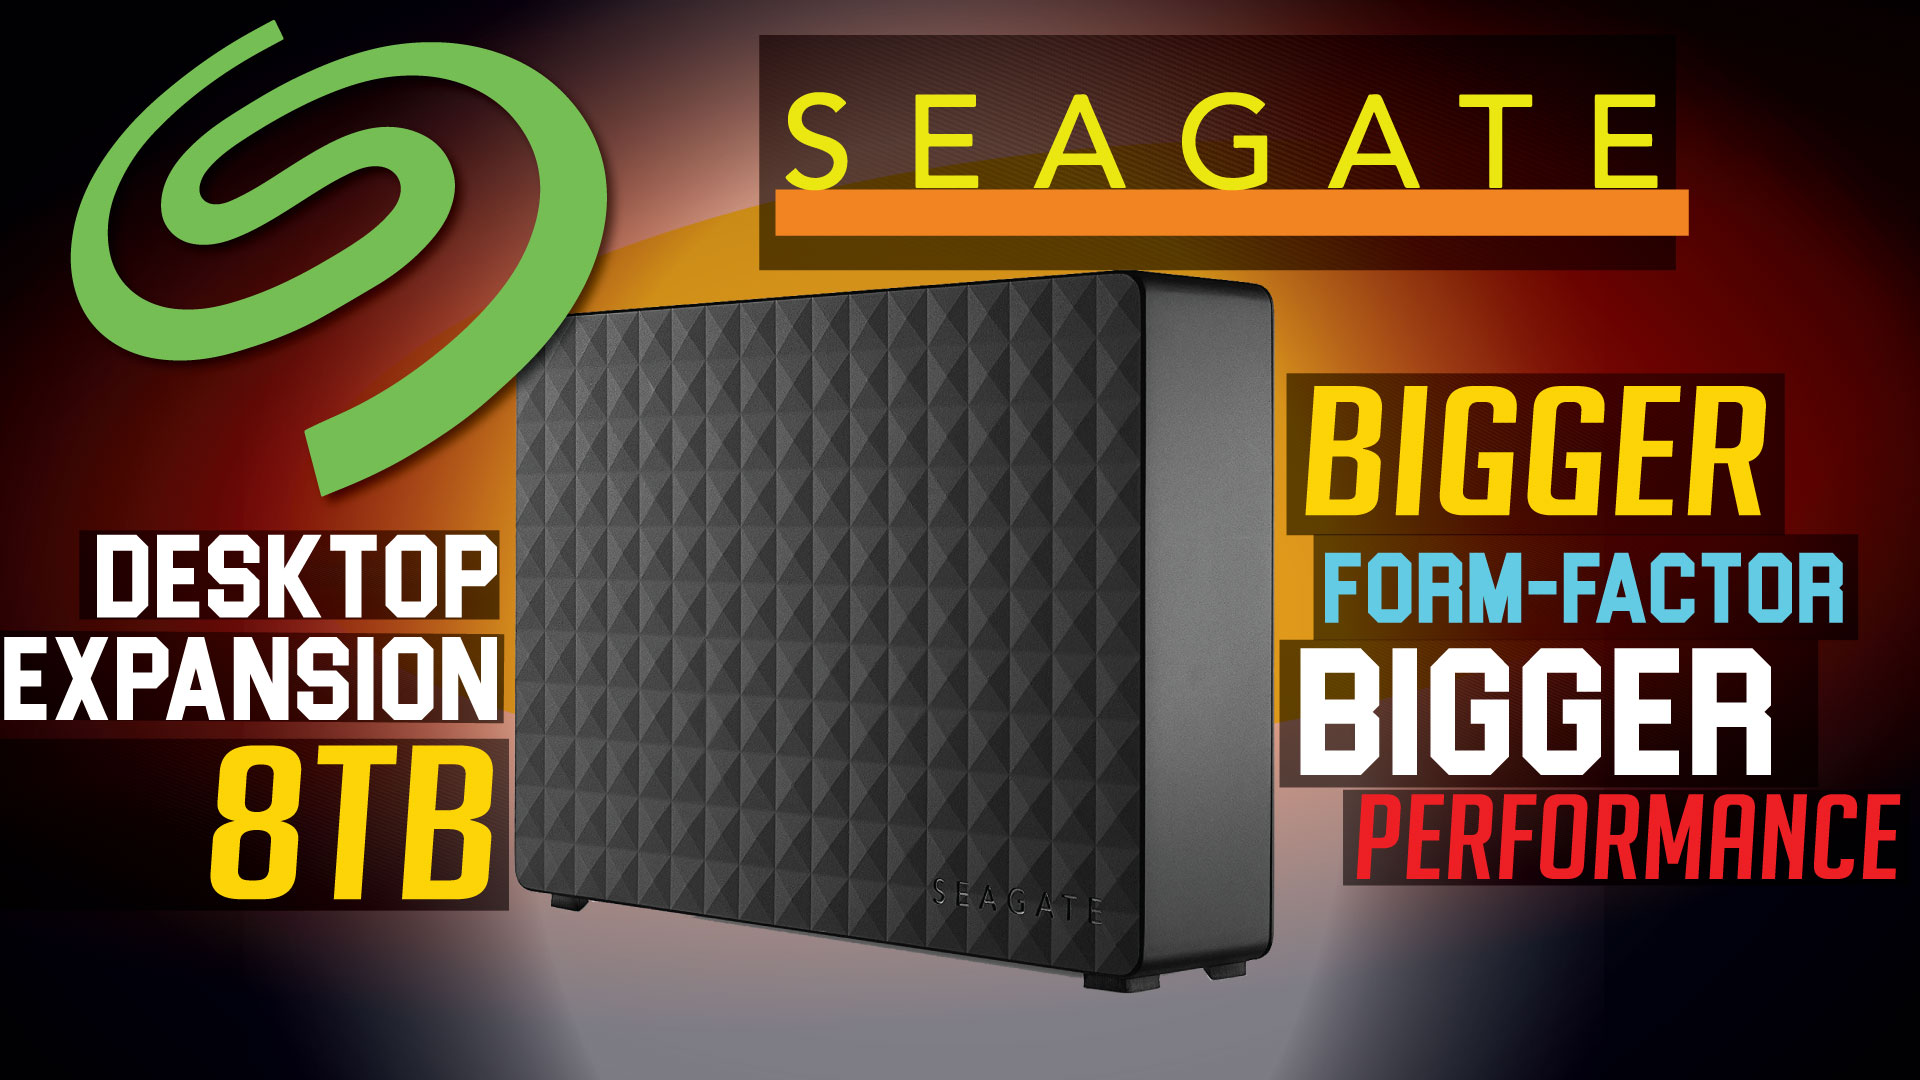 Seagate Desktop Expansion Hardware Review Real 8TB | Reviews